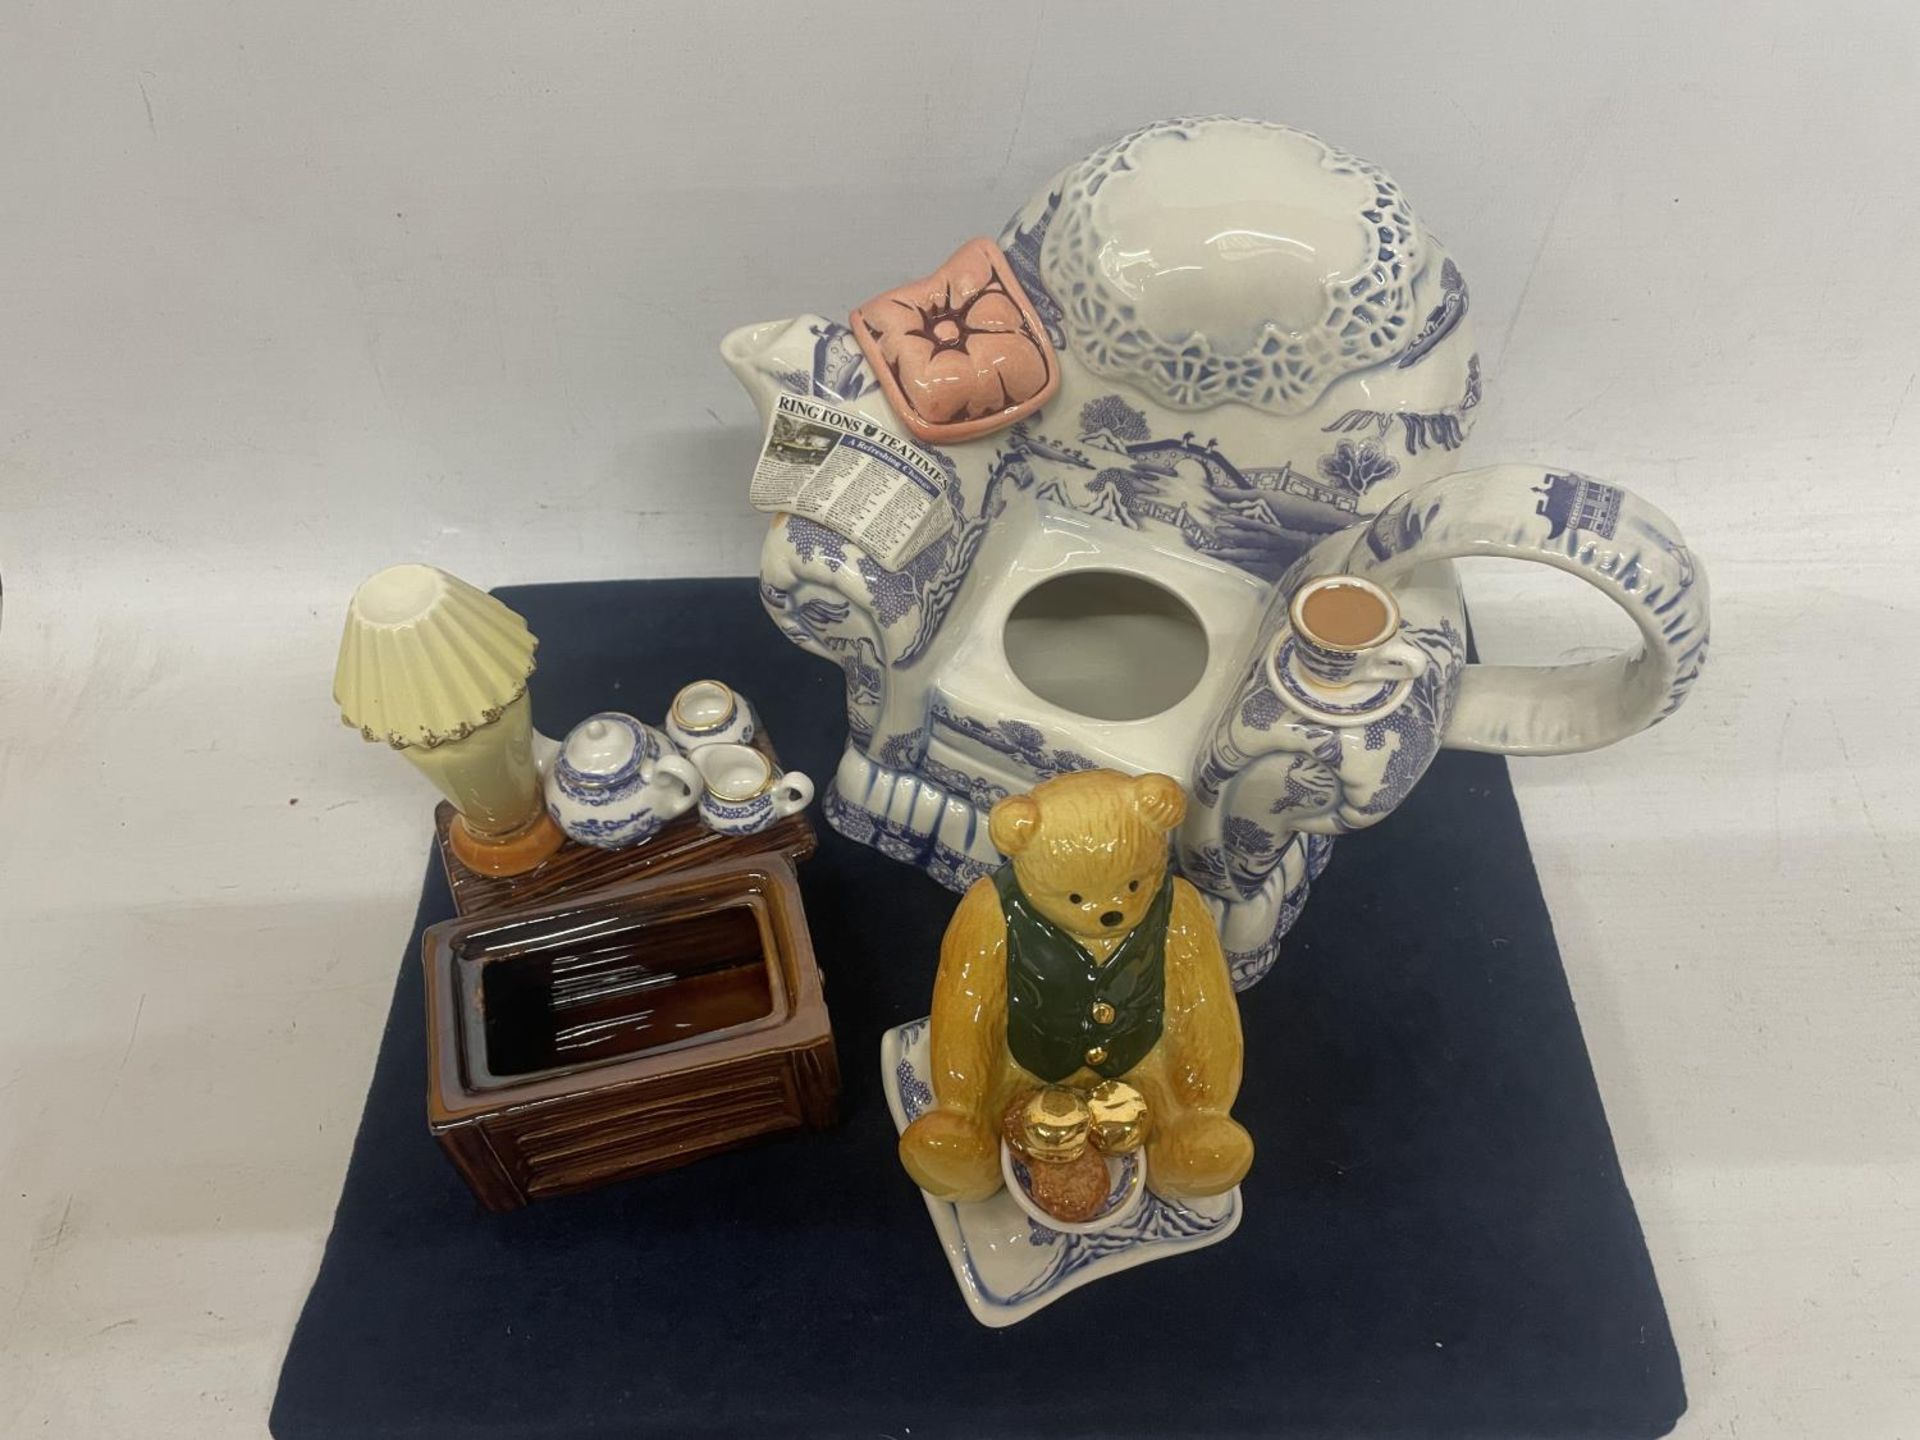 A RINGTONS TEA TIME TEAPOT WITH COA NUMBER 778 - Image 3 of 4